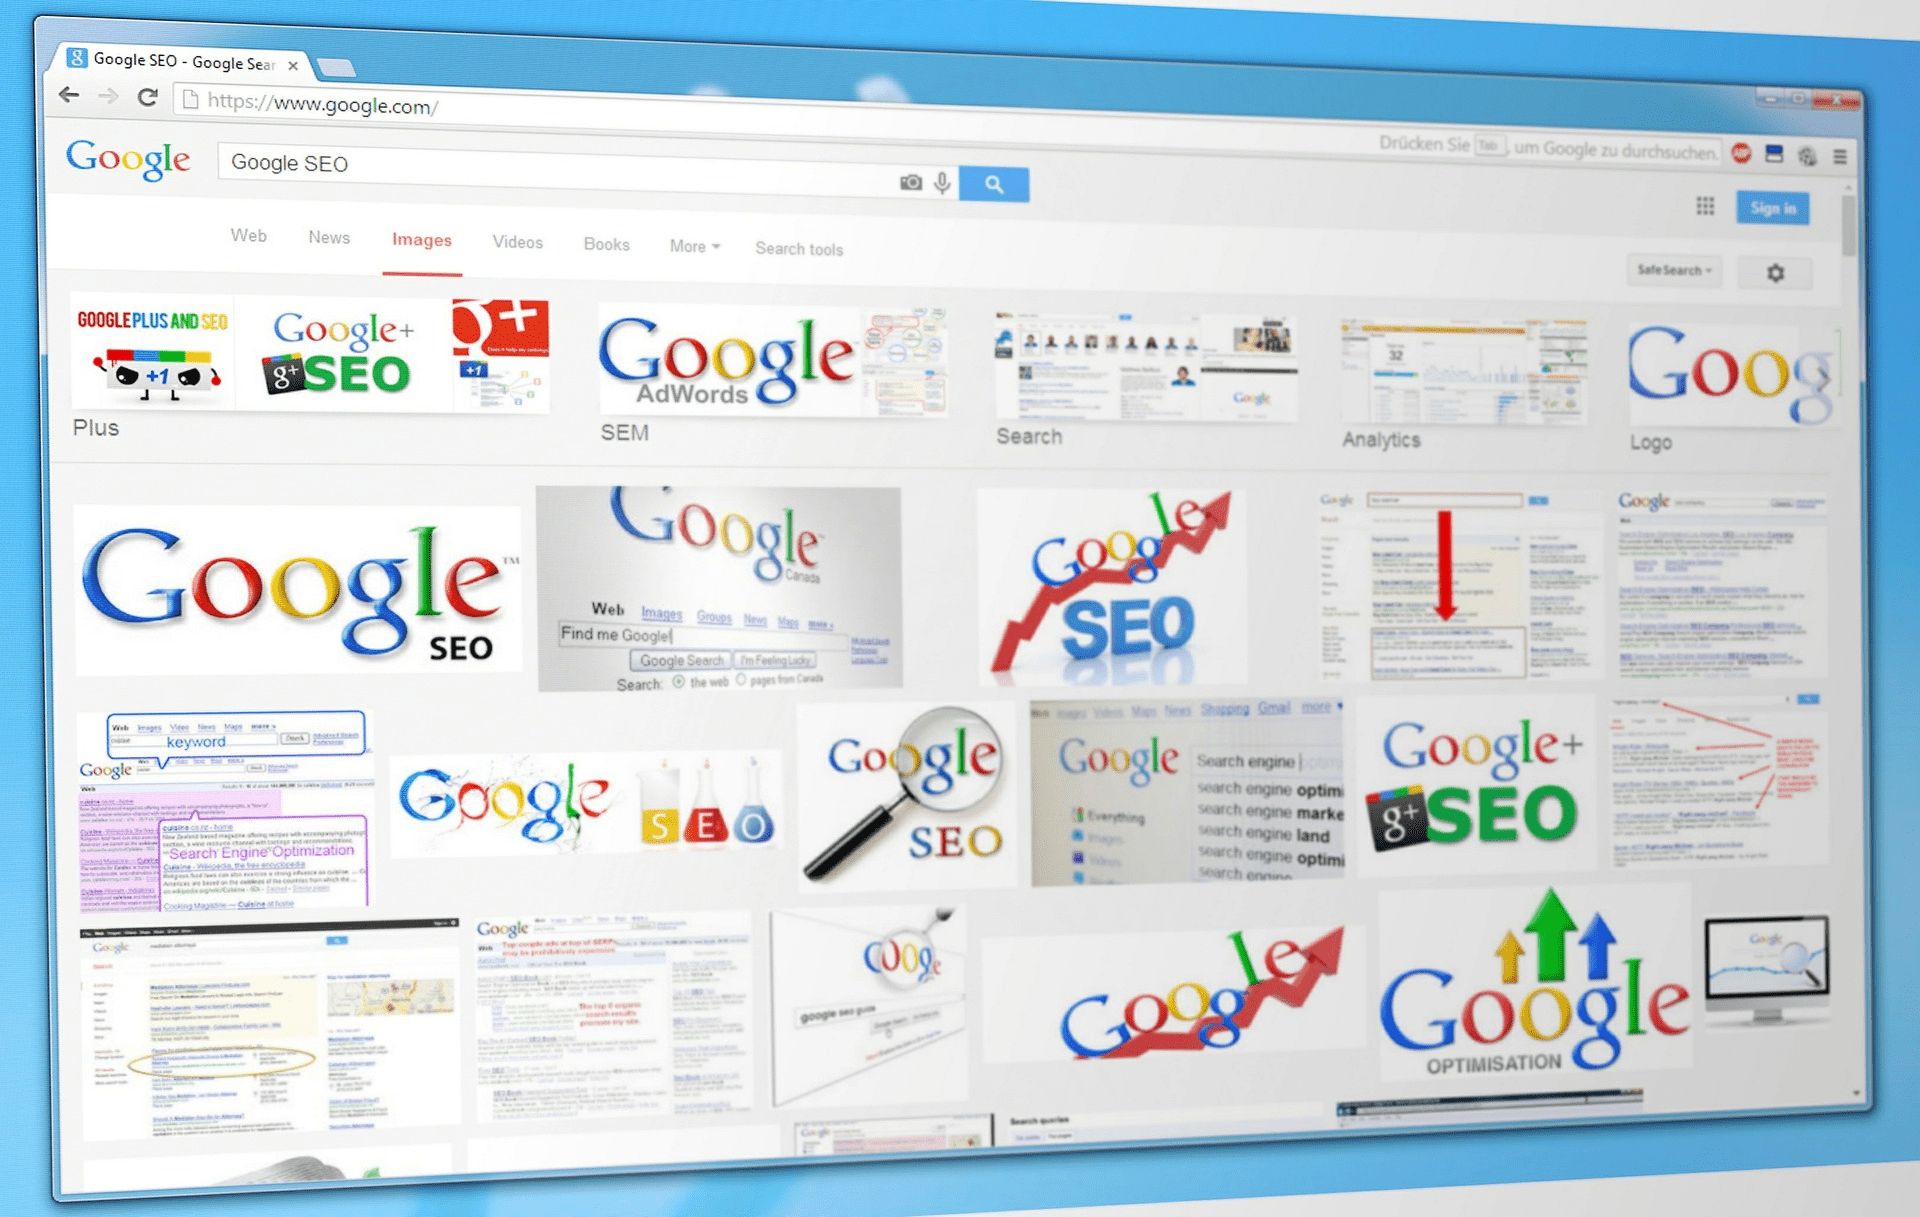 Lots of Google and SEO.Website backgrounds.